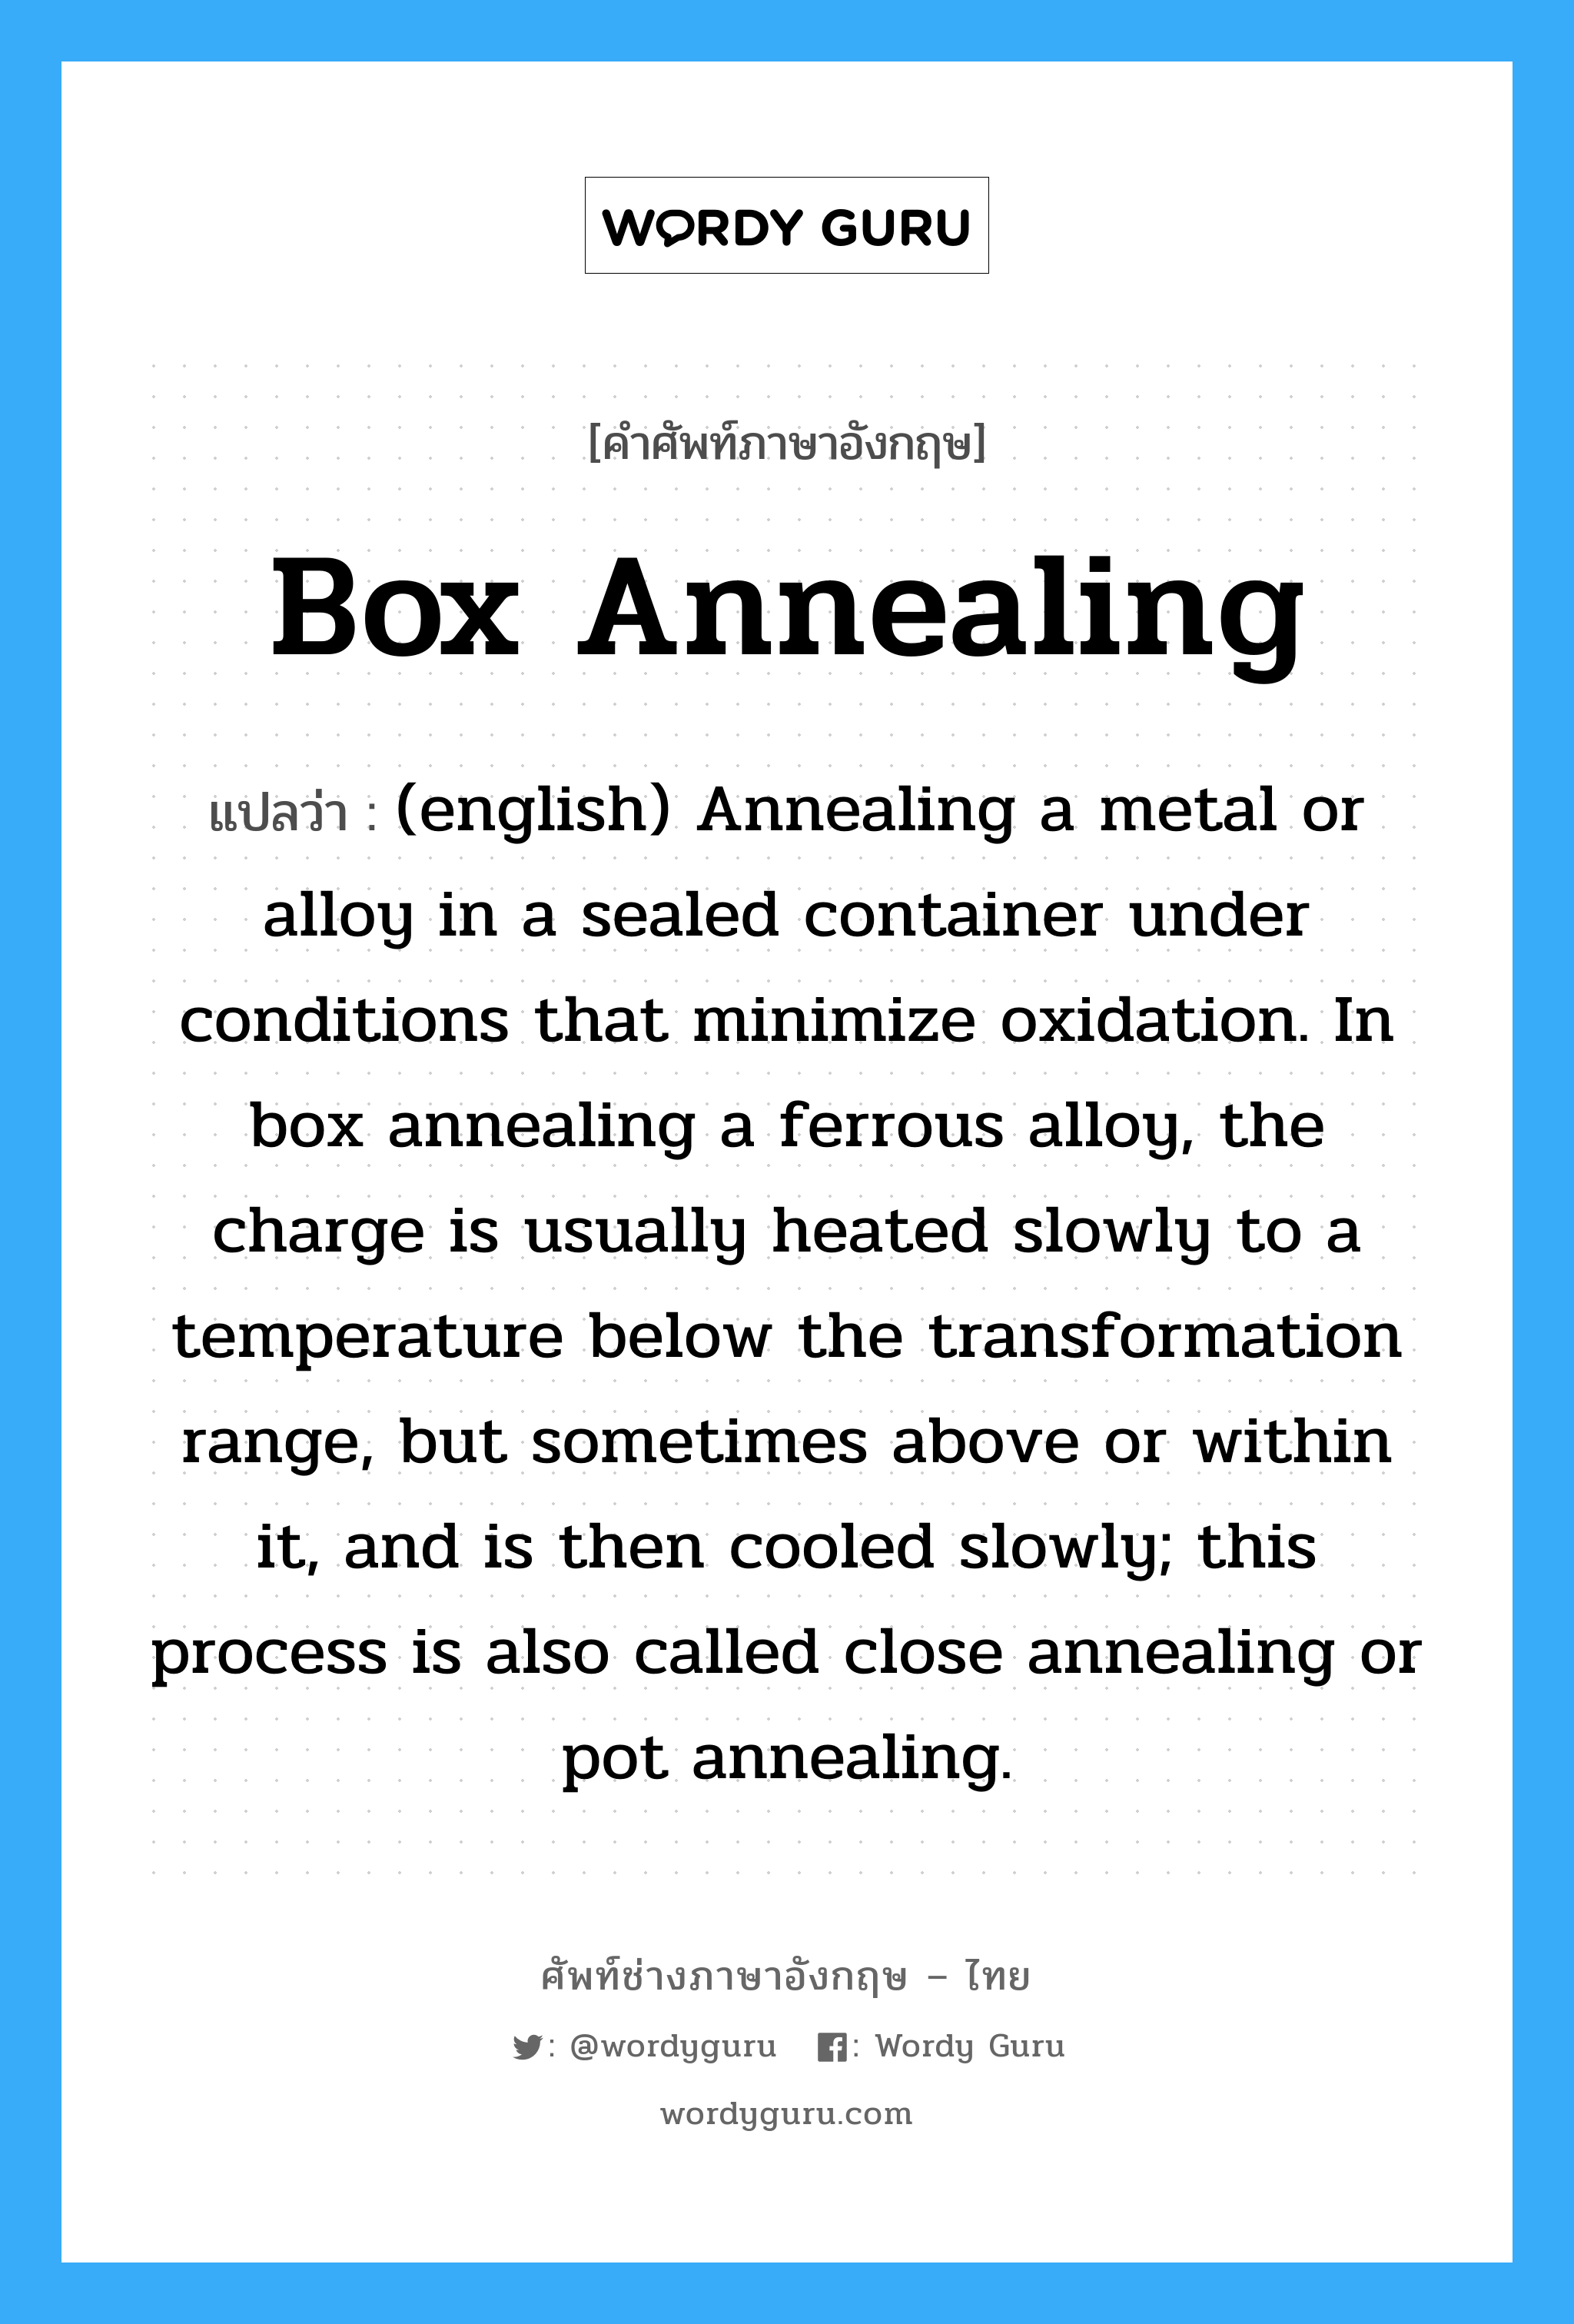 Box Annealing แปลว่า?, คำศัพท์ช่างภาษาอังกฤษ - ไทย Box Annealing คำศัพท์ภาษาอังกฤษ Box Annealing แปลว่า (english) Annealing a metal or alloy in a sealed container under conditions that minimize oxidation. In box annealing a ferrous alloy, the charge is usually heated slowly to a temperature below the transformation range, but sometimes above or within it, and is then cooled slowly; this process is also called close annealing or pot annealing.